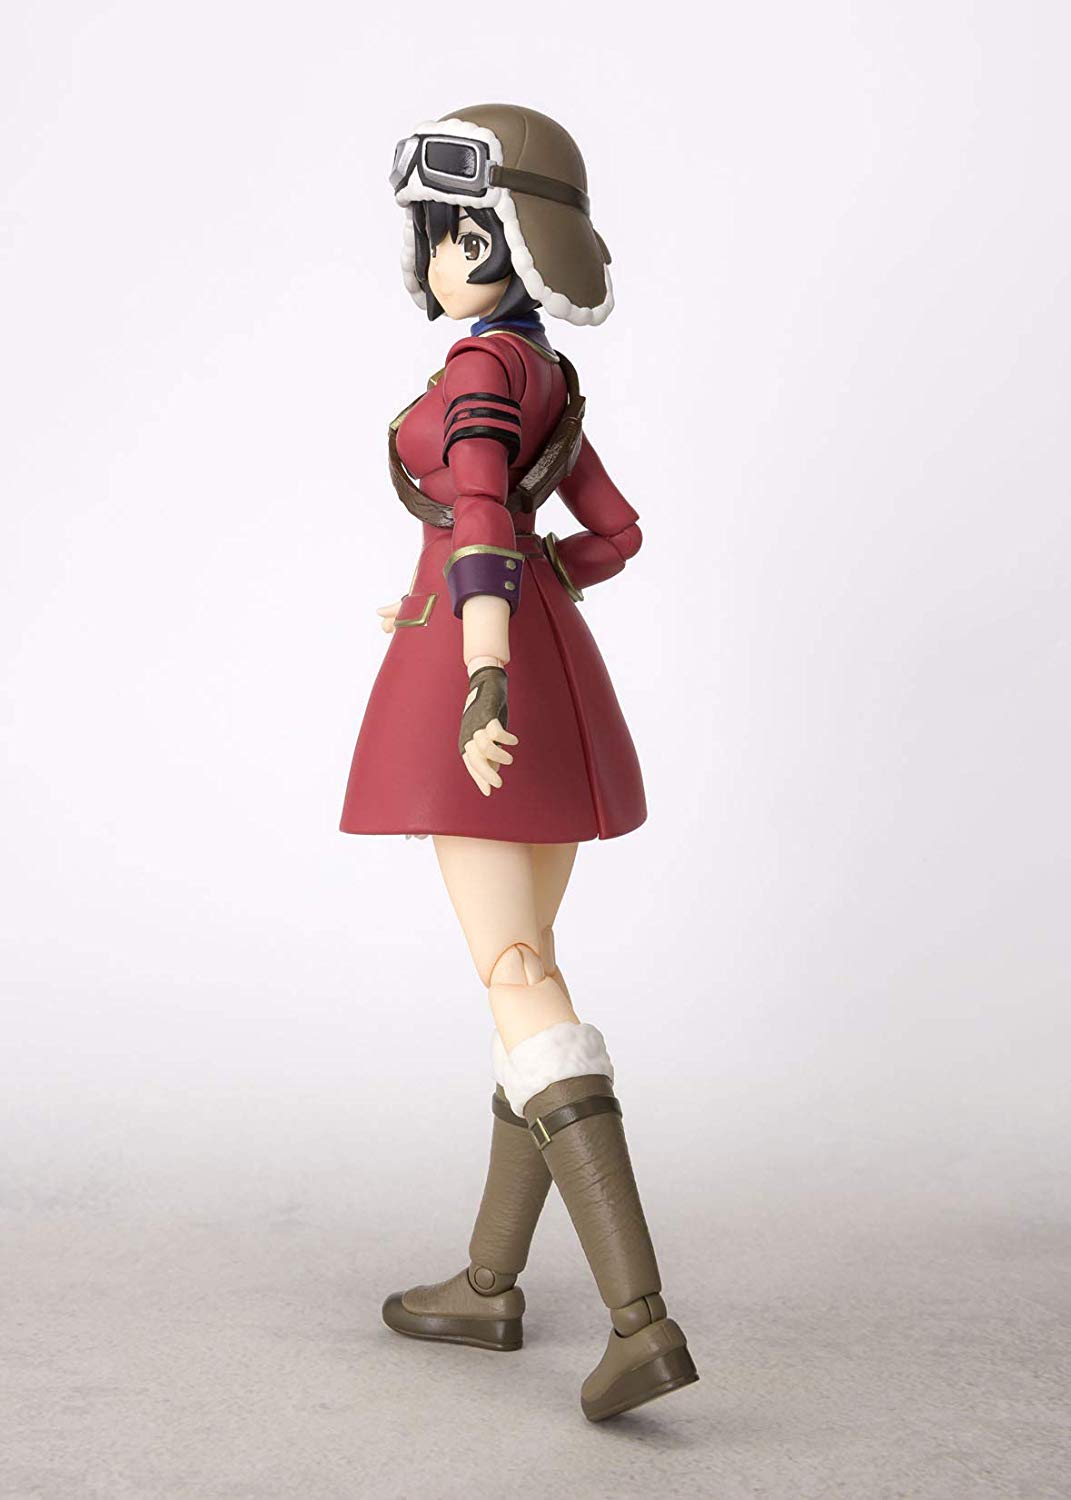 The Kotobuki Squadron In the Wilderness - S.H.Figuarts - Kylie Action Figure